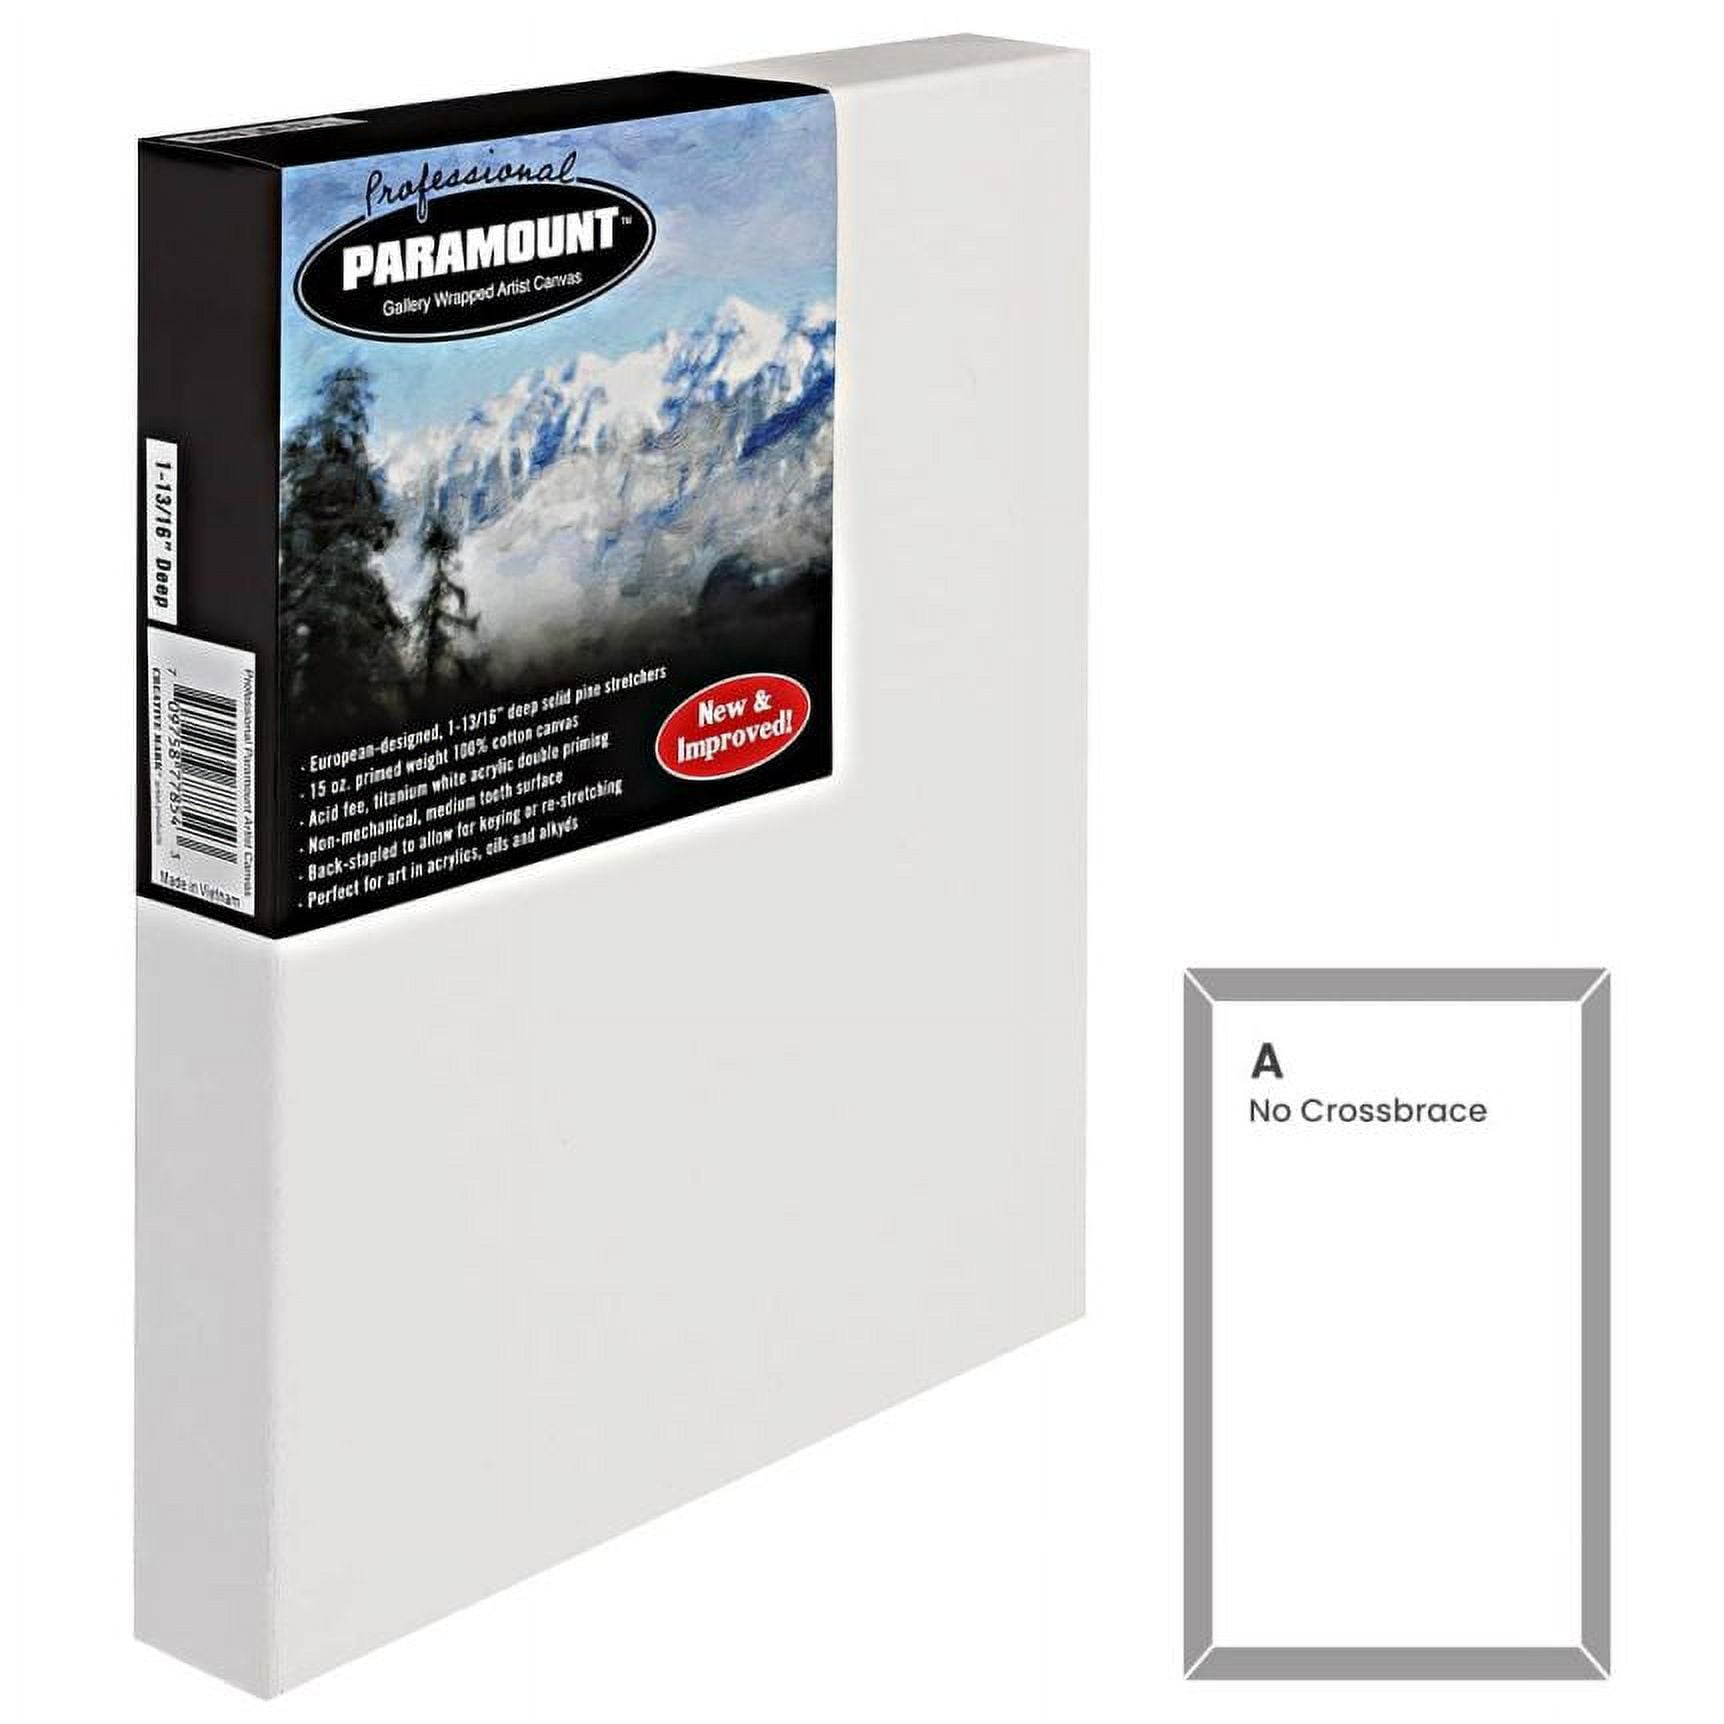 Pre Stretched Cotton Canvas, 11x14 Inch | 7 Pack of Triple Primed Blank  White Artists Canvases | Art Supplies for Painting, Acrylics, and Oil Paint  